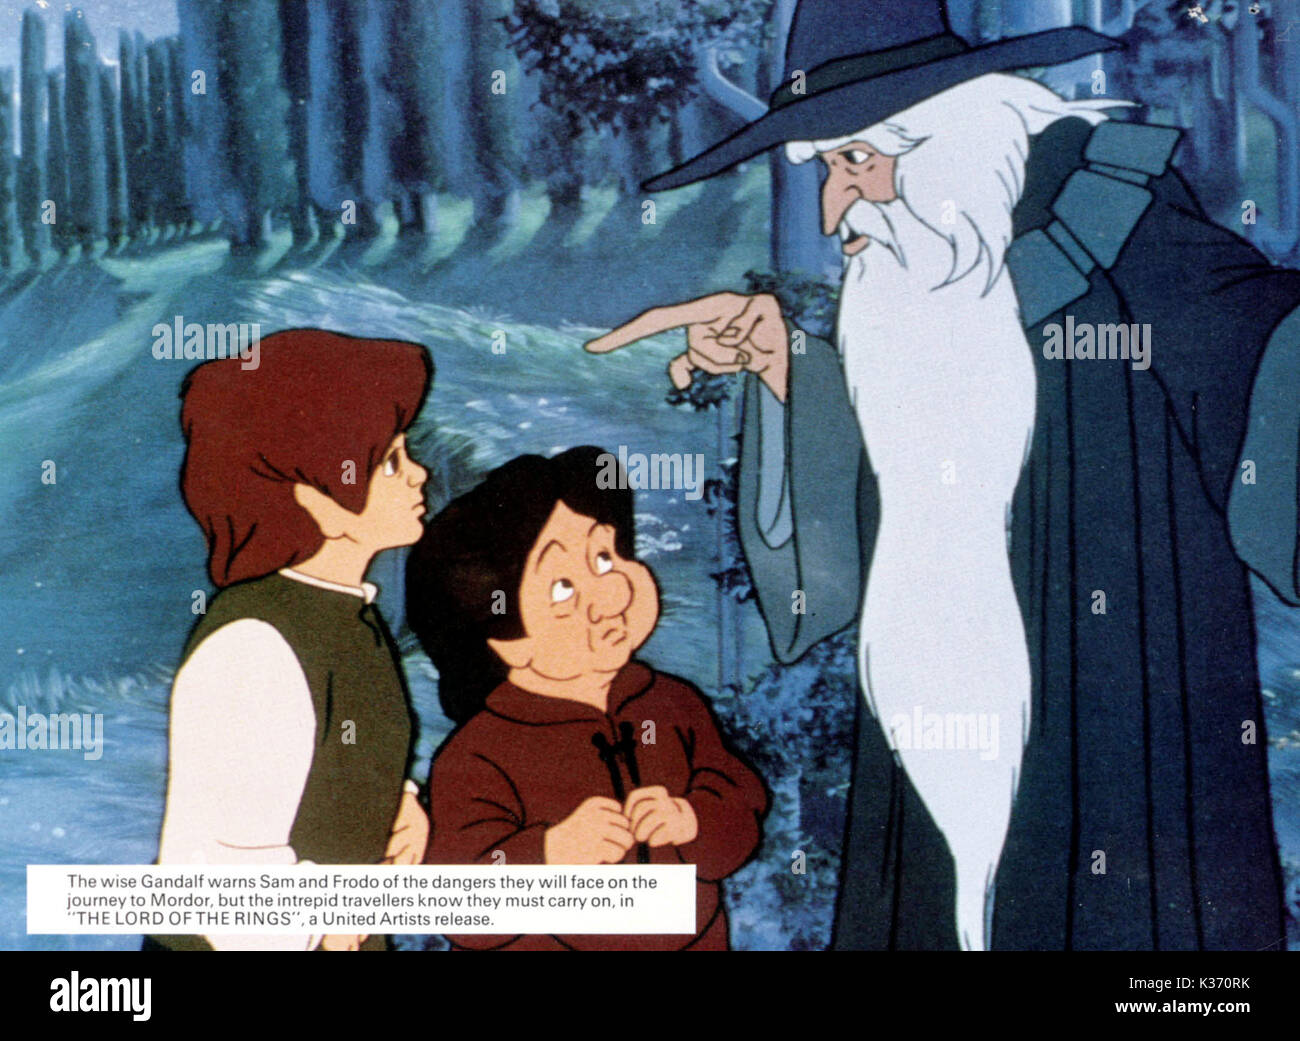 THE LORD OF THE RINGS ANIMATED FEATURE Date: 1978 Stock Photo - Alamy